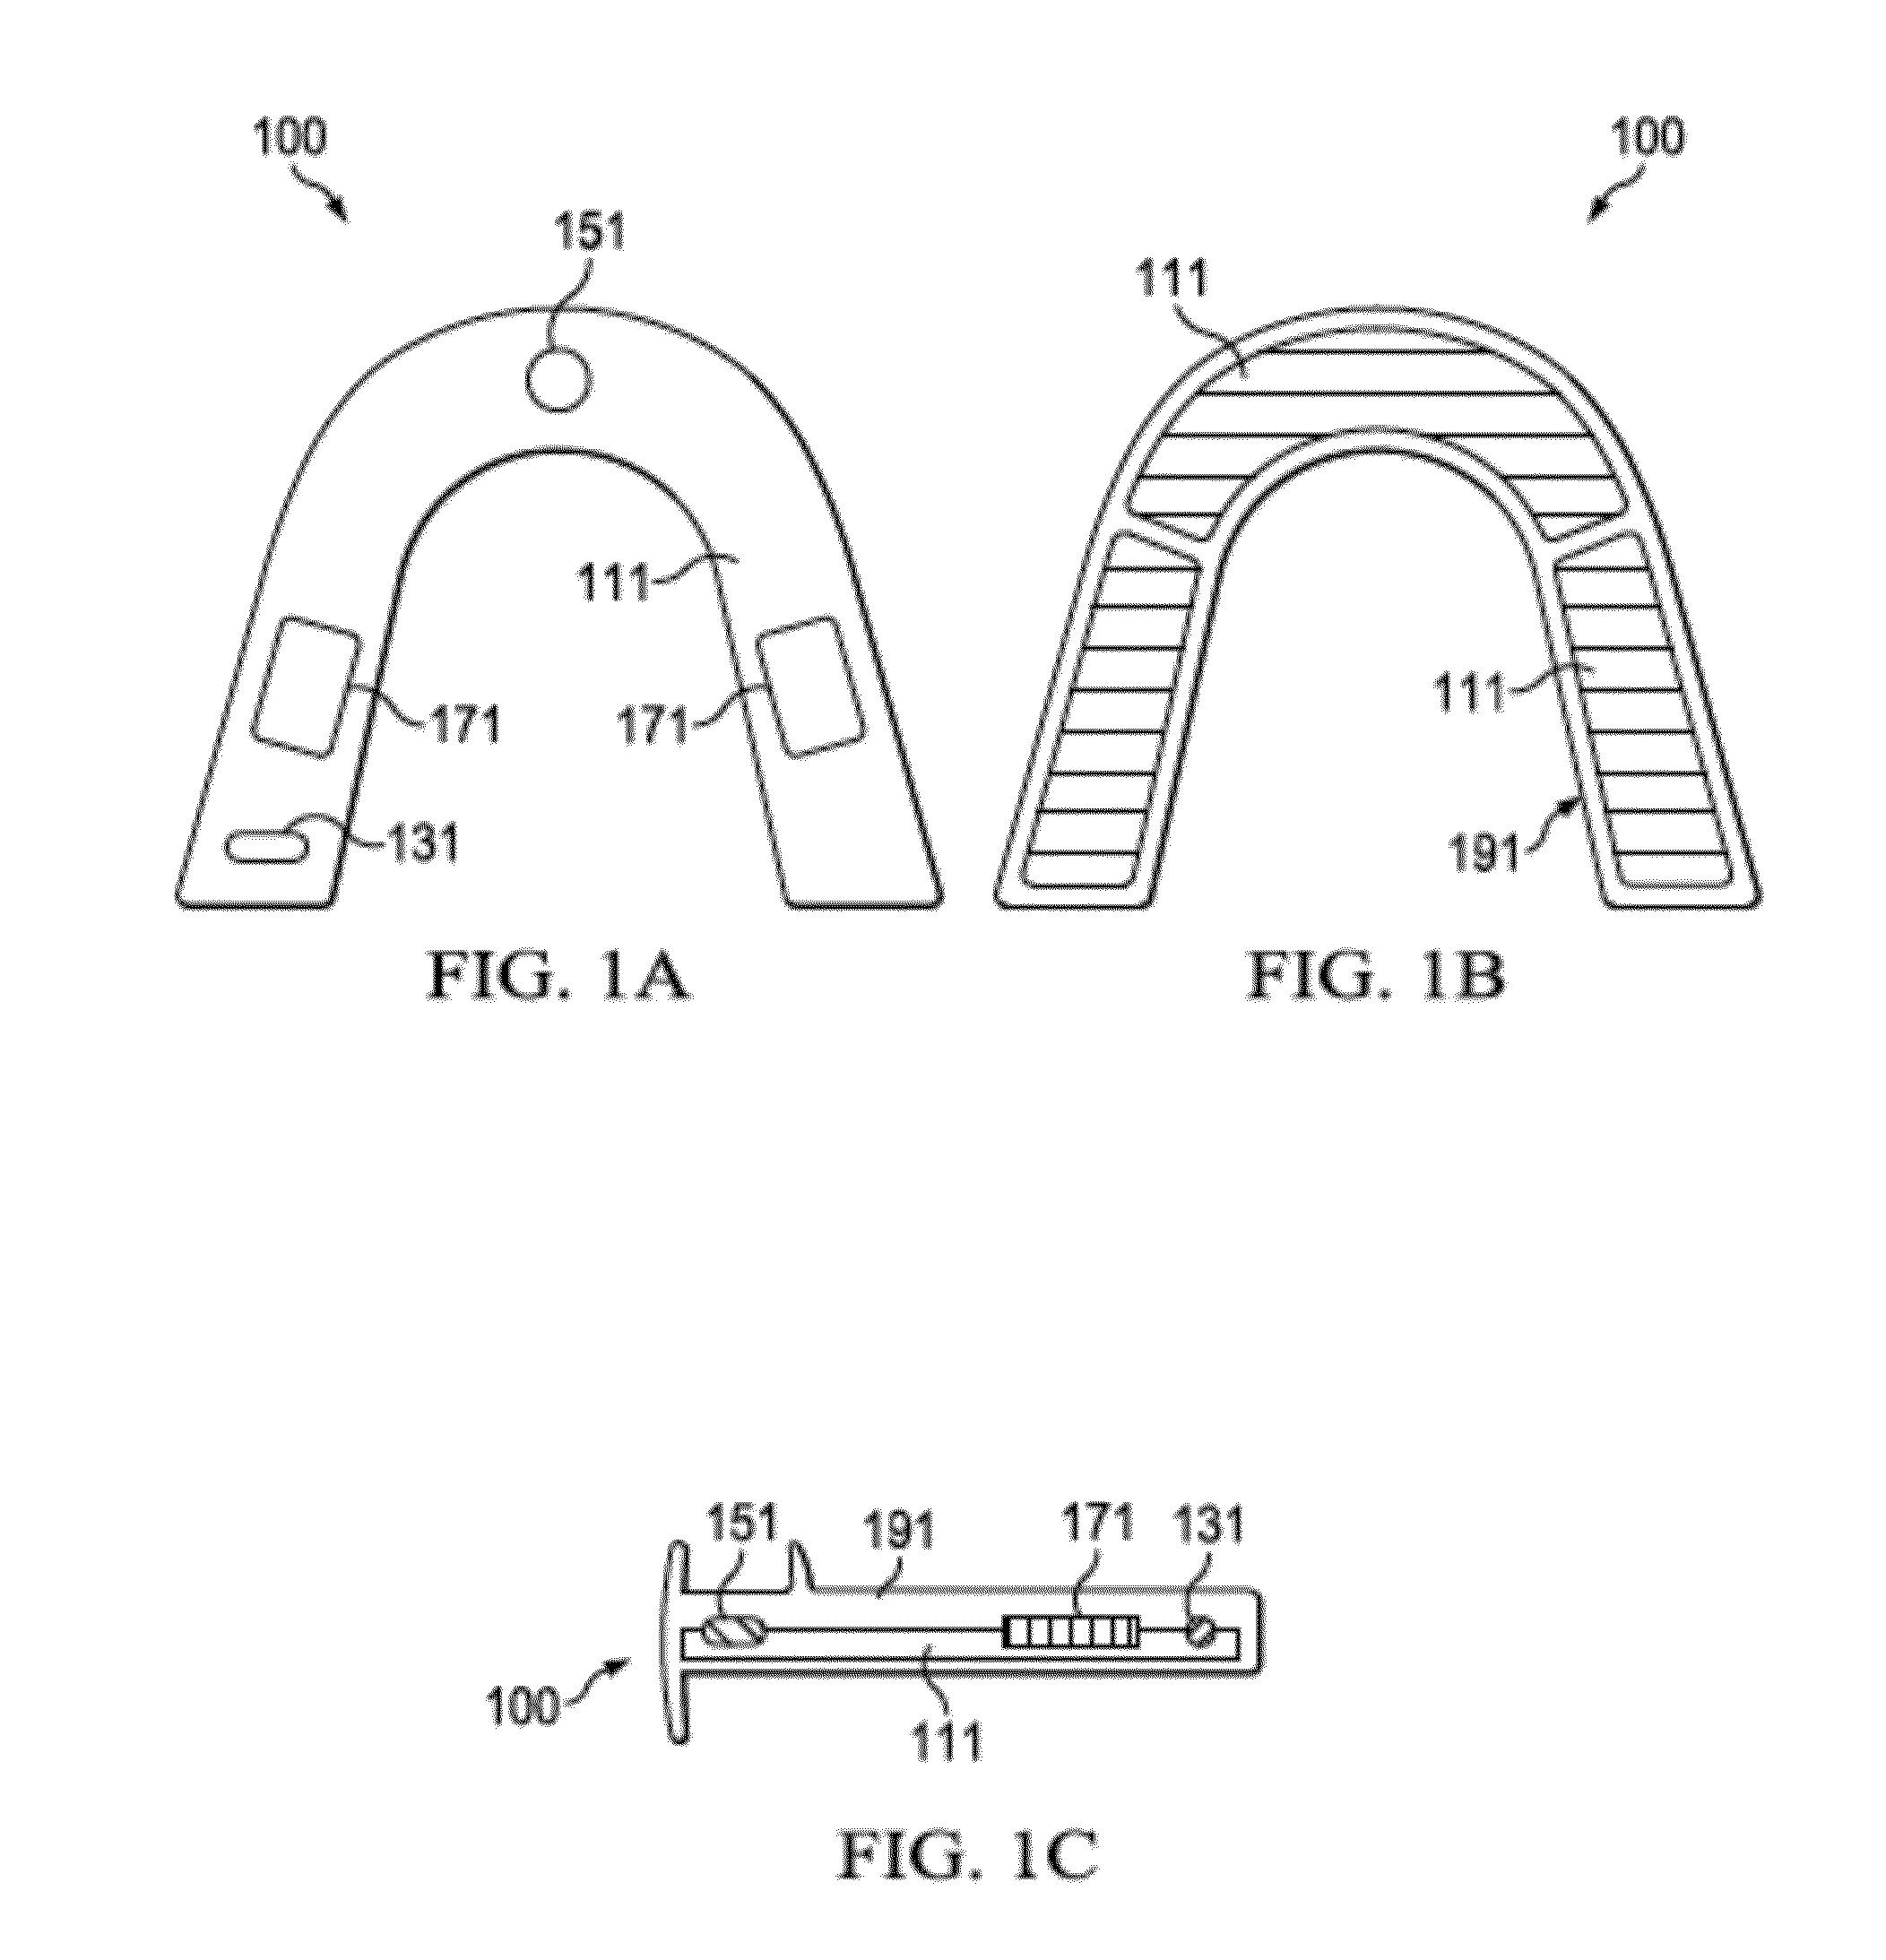 Intra-oral vibrating othodontic devices